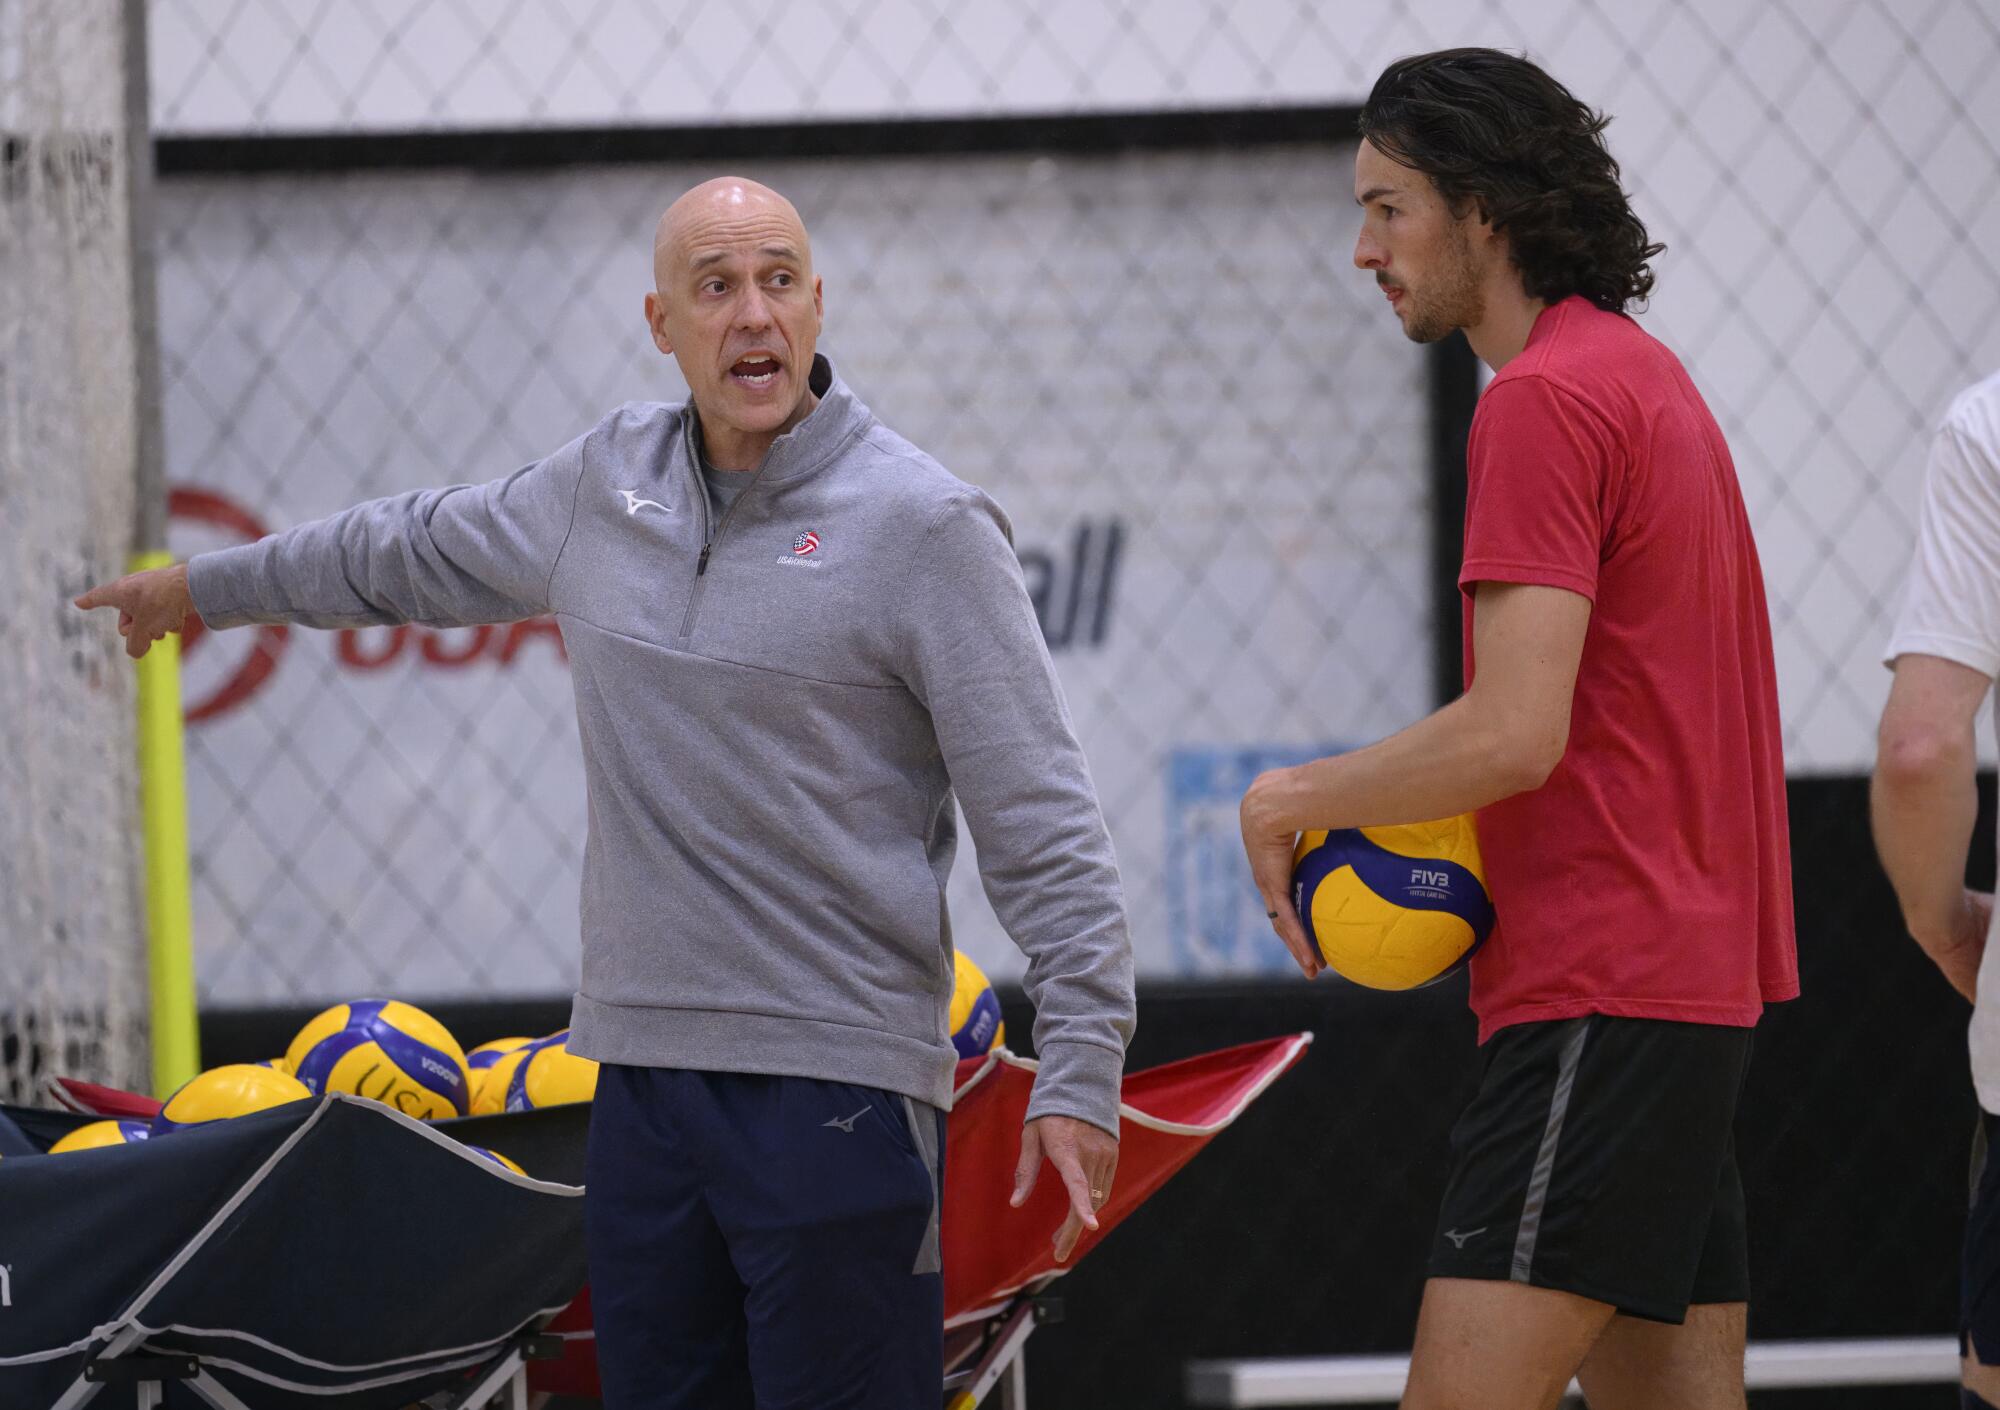 U.S. volleyball coach John Speraw, left, gives instructions during a national team practice session in Anaheim.